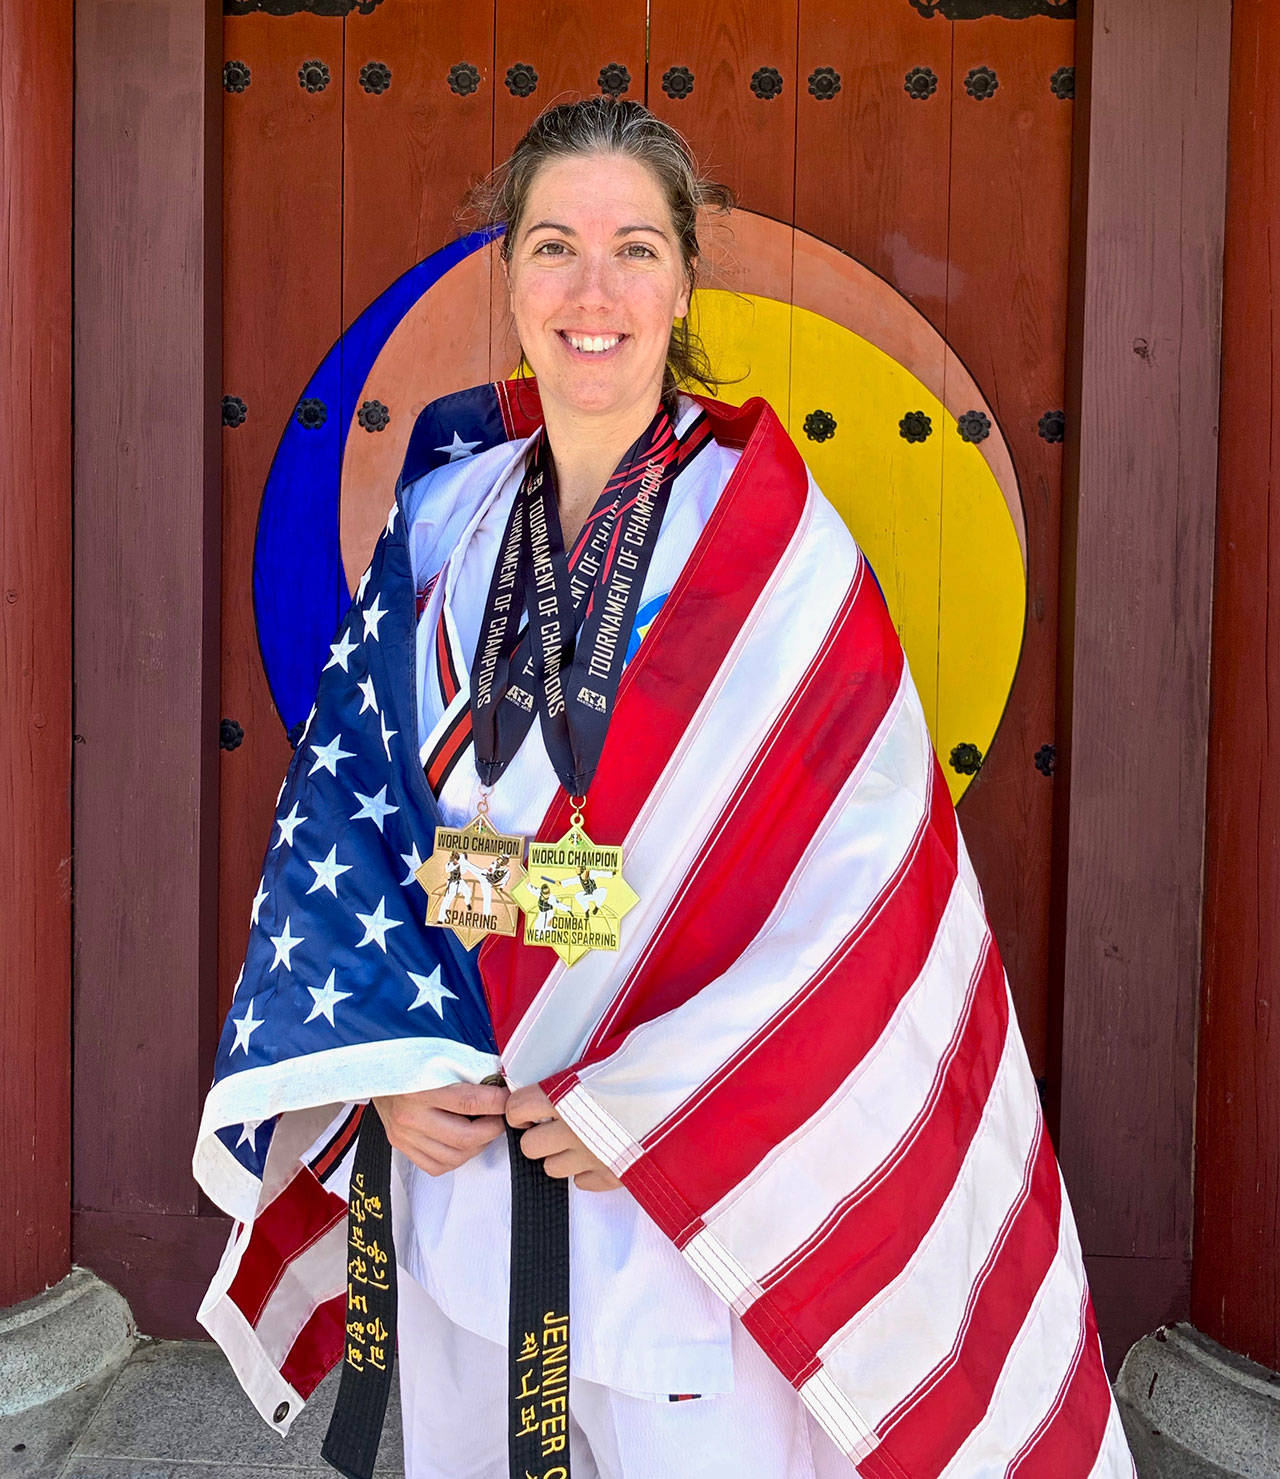 Jenny Cisney finished first in combat sparring at the ATA world championships last week.(submitted photo)